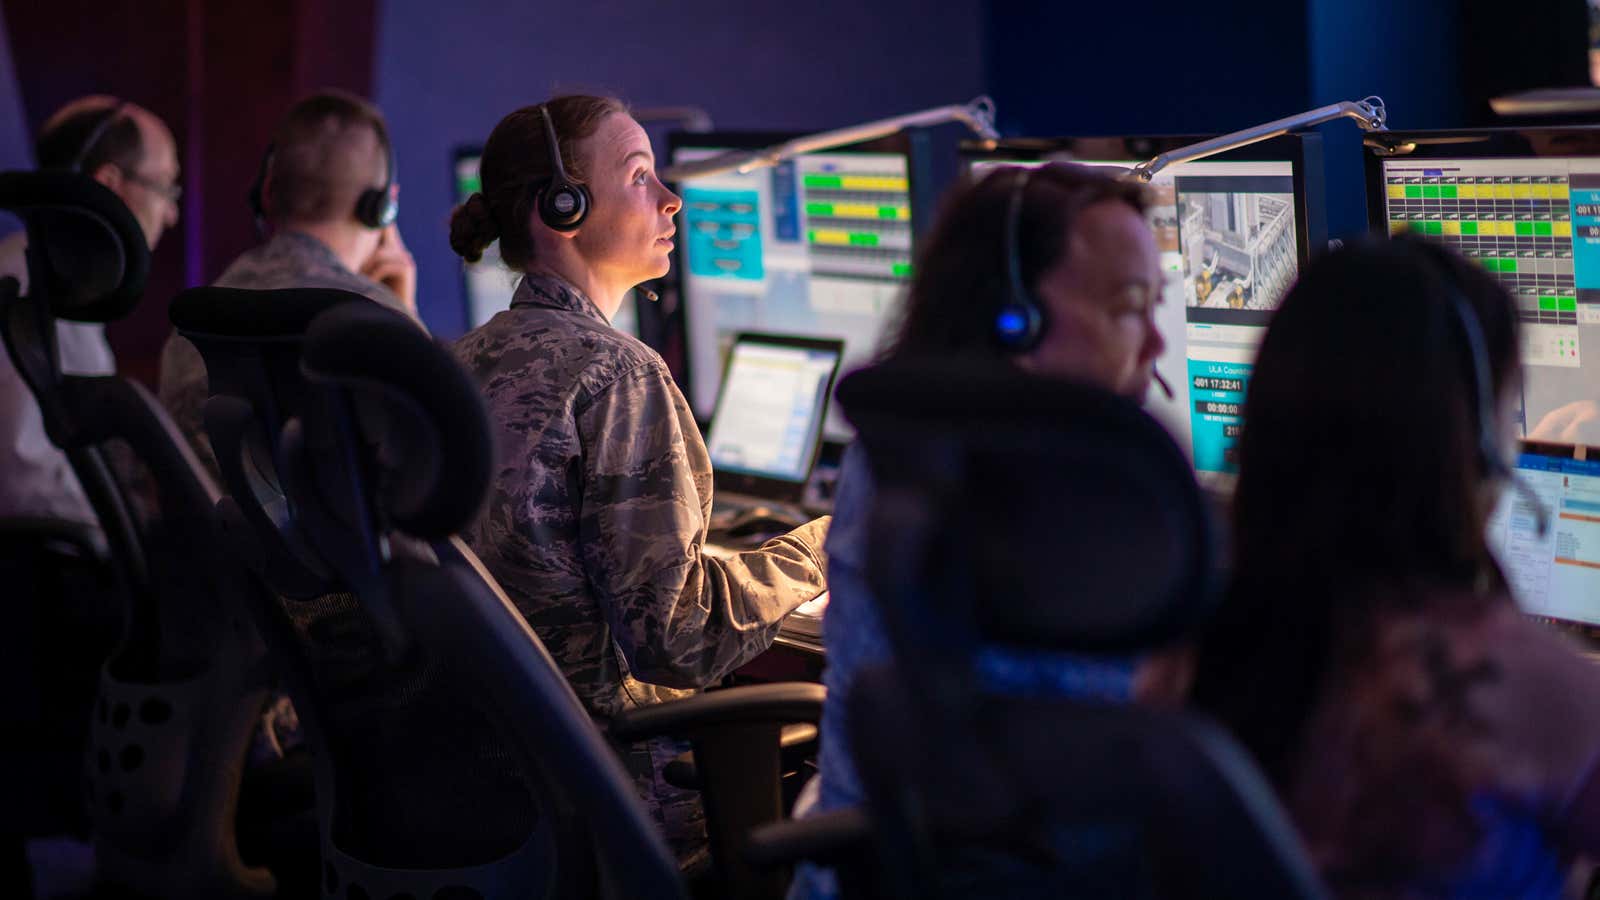 Air Force personnel at Cape Canaveral supervise the launch of a military satellite in 2019.